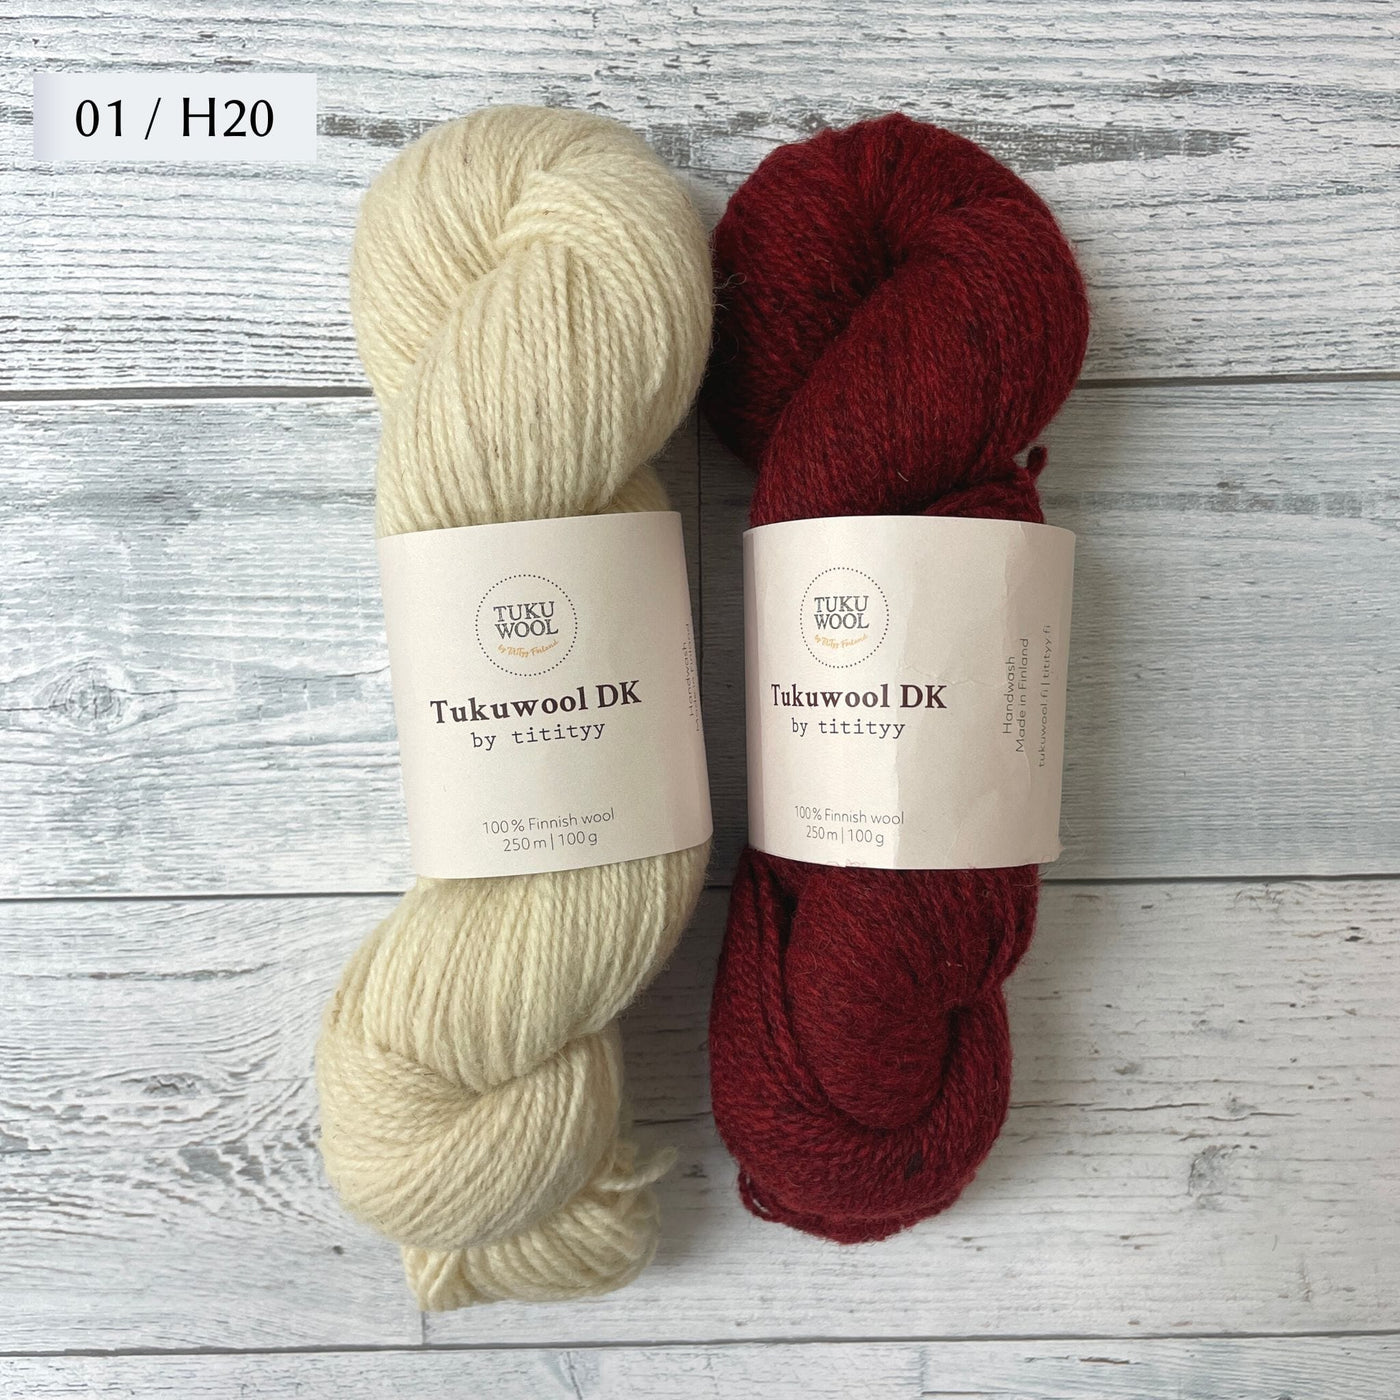 Two Skeins of Tukuwool DK shown as a colorway option for the Muisto Hat & Mittens Set. 01 (cream) and H20 (heathered deep red.)